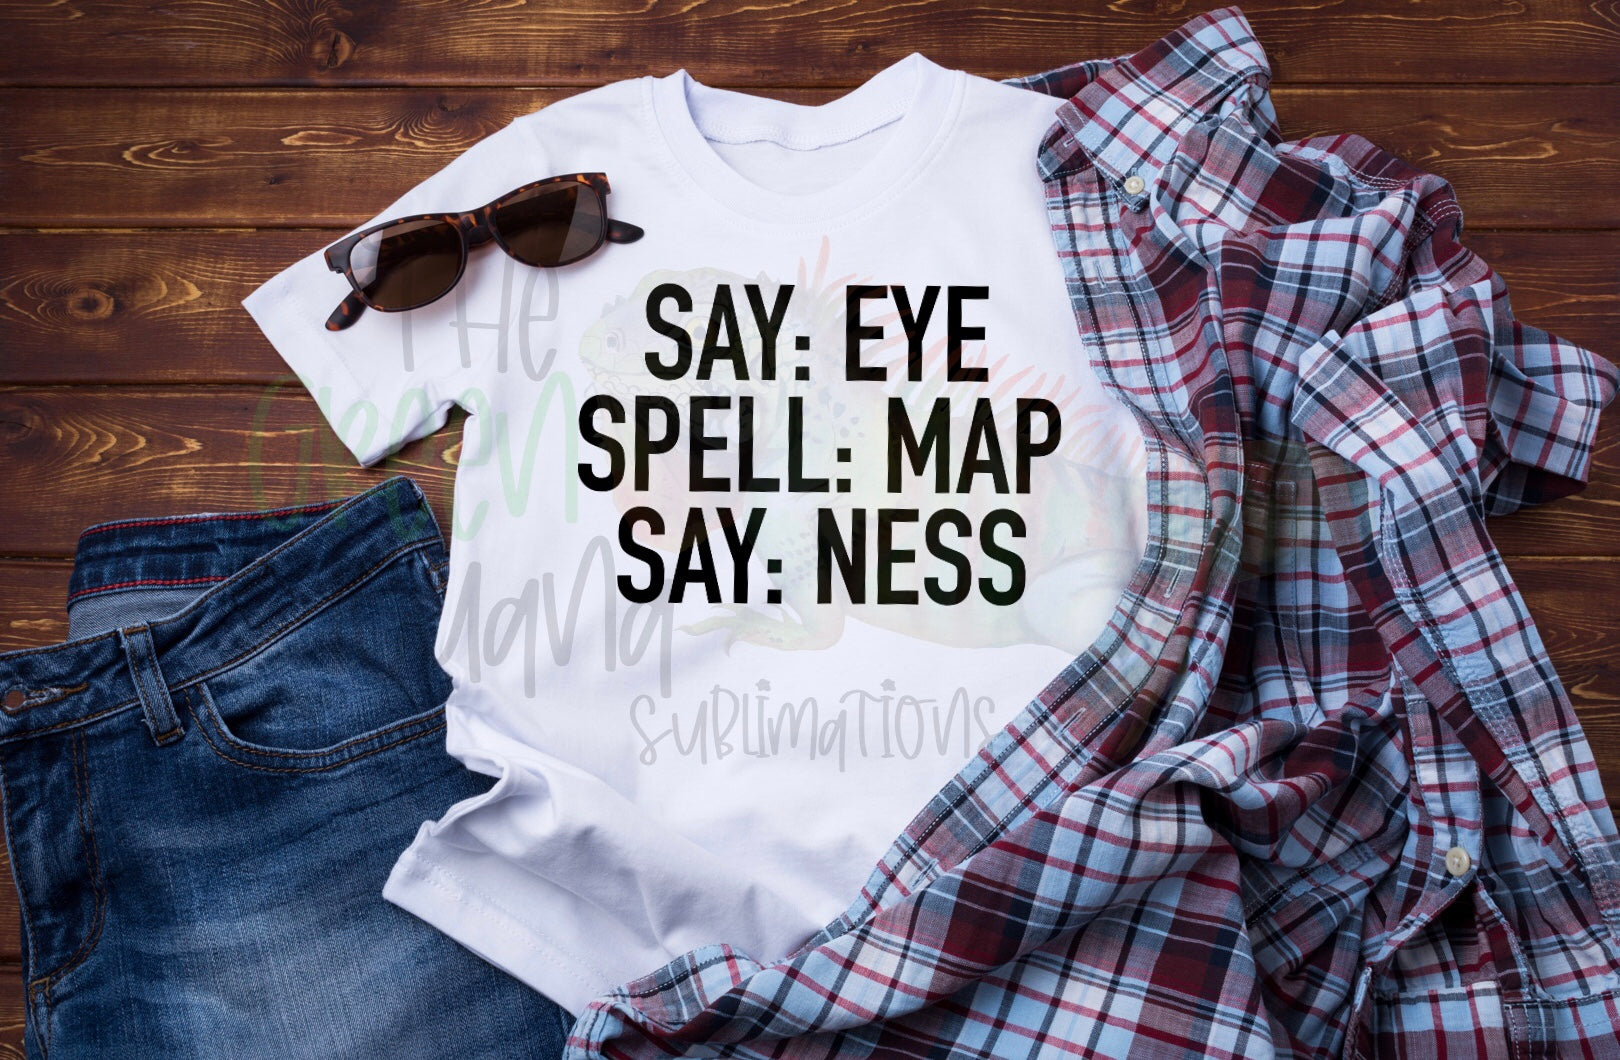 Say: eye, spell: map, say: ness